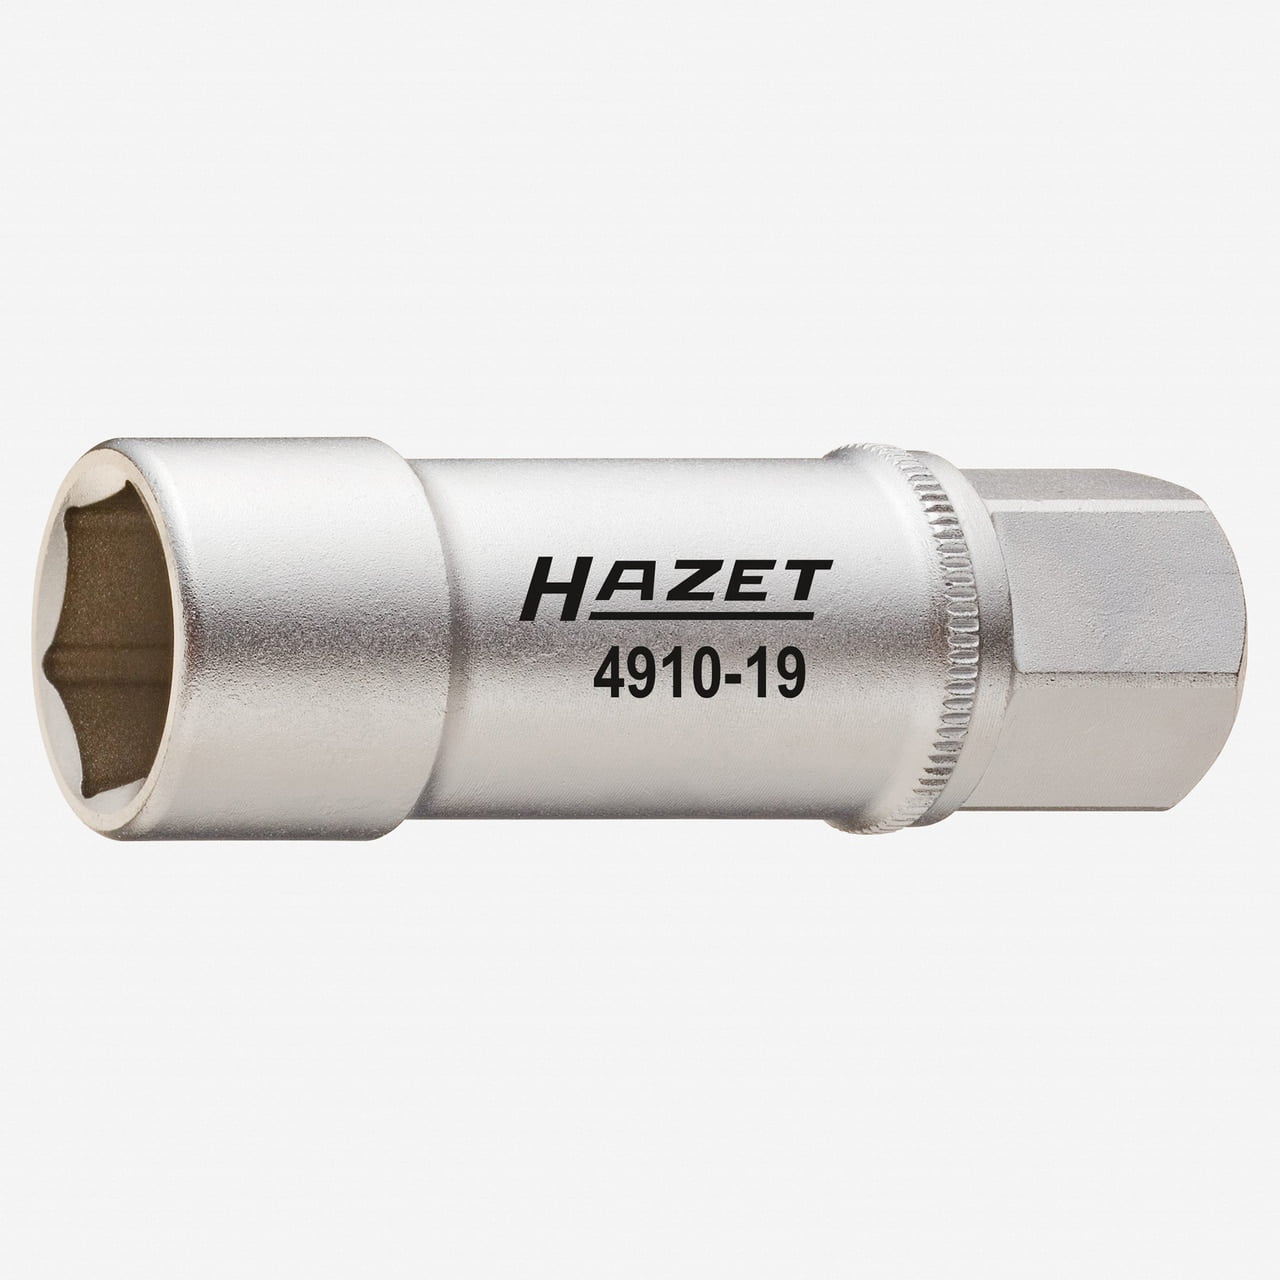 Hazet Ratchet Wrench 1/2" Drive Locking Quick Release New  916S